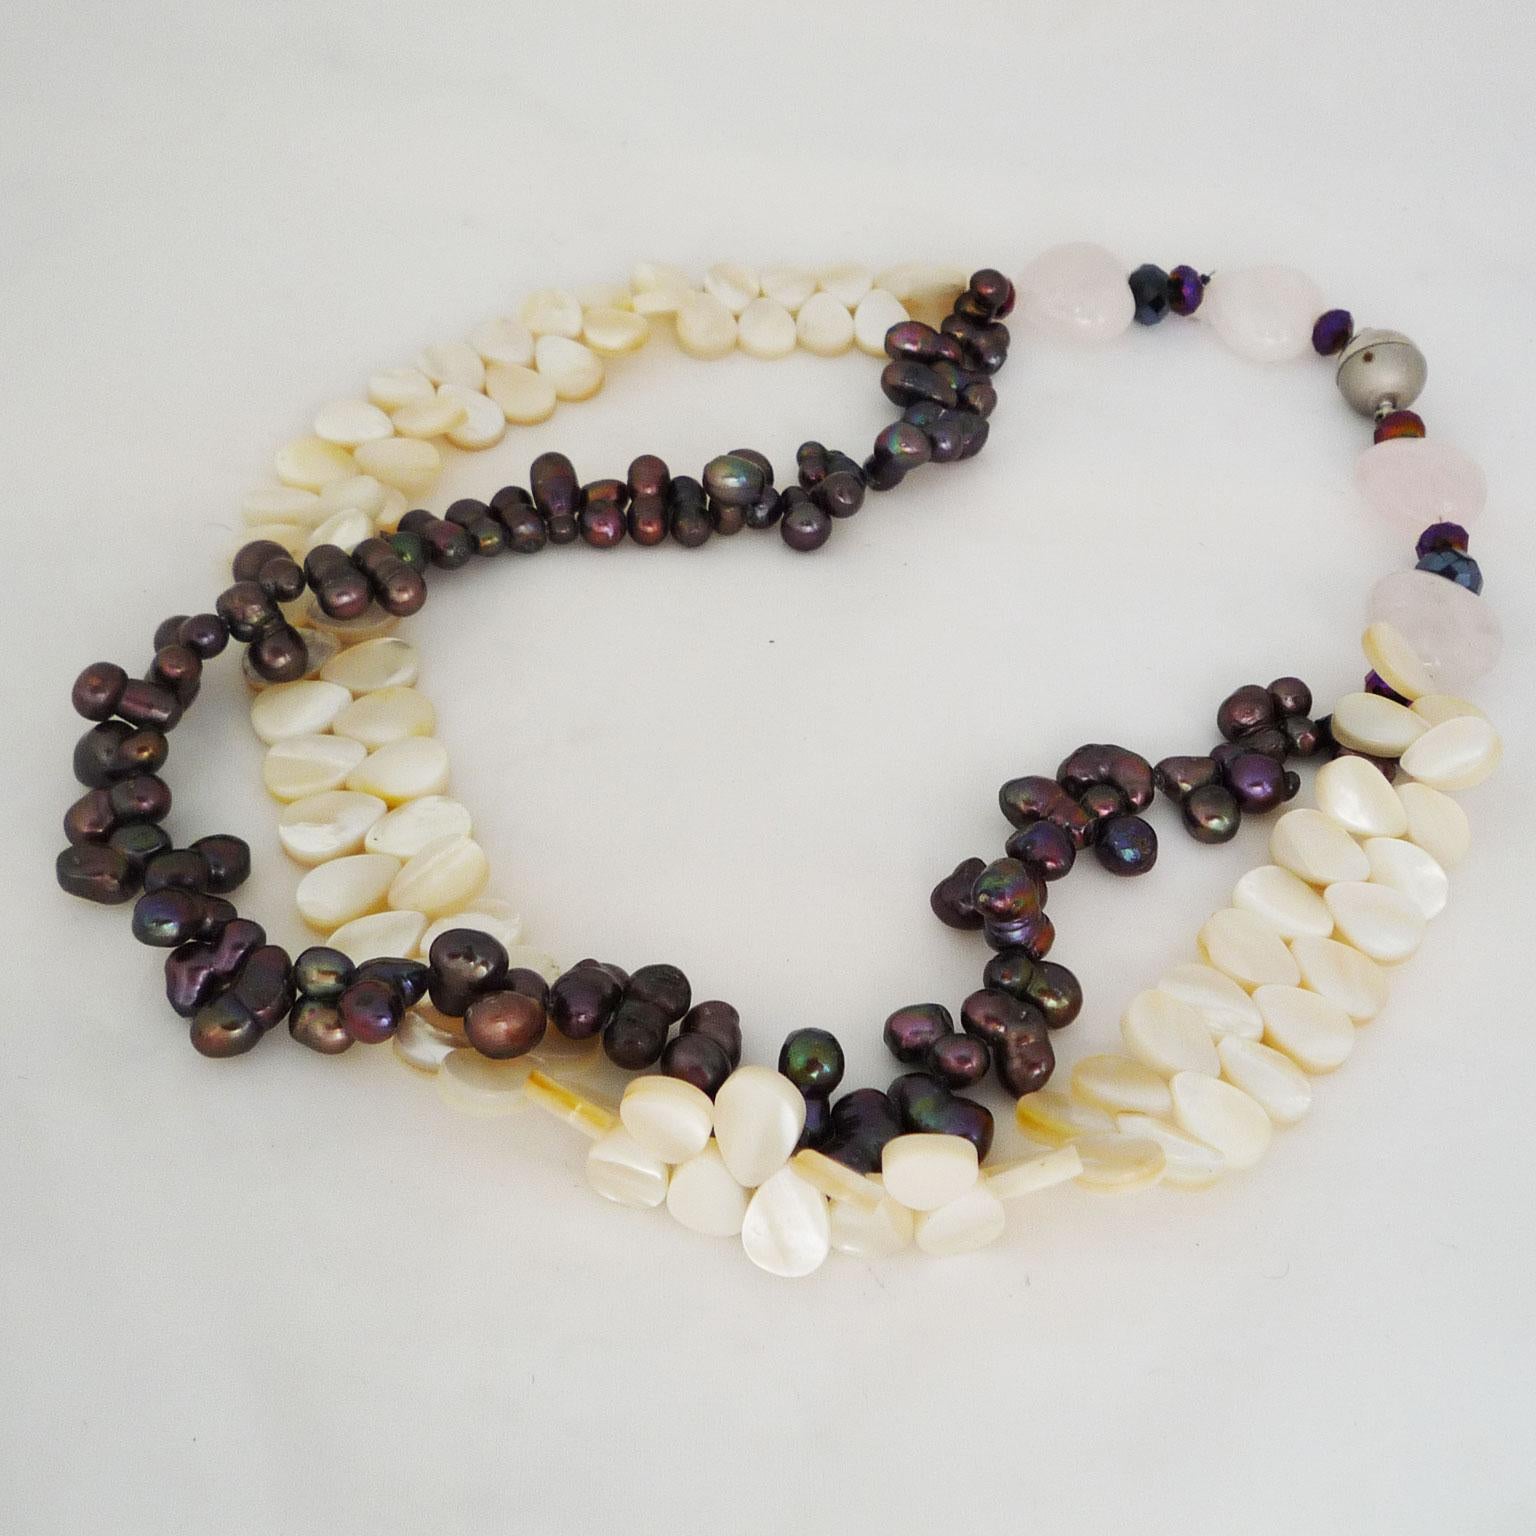 Necklace made of dark pearls and mother-of-pearl plates Damen